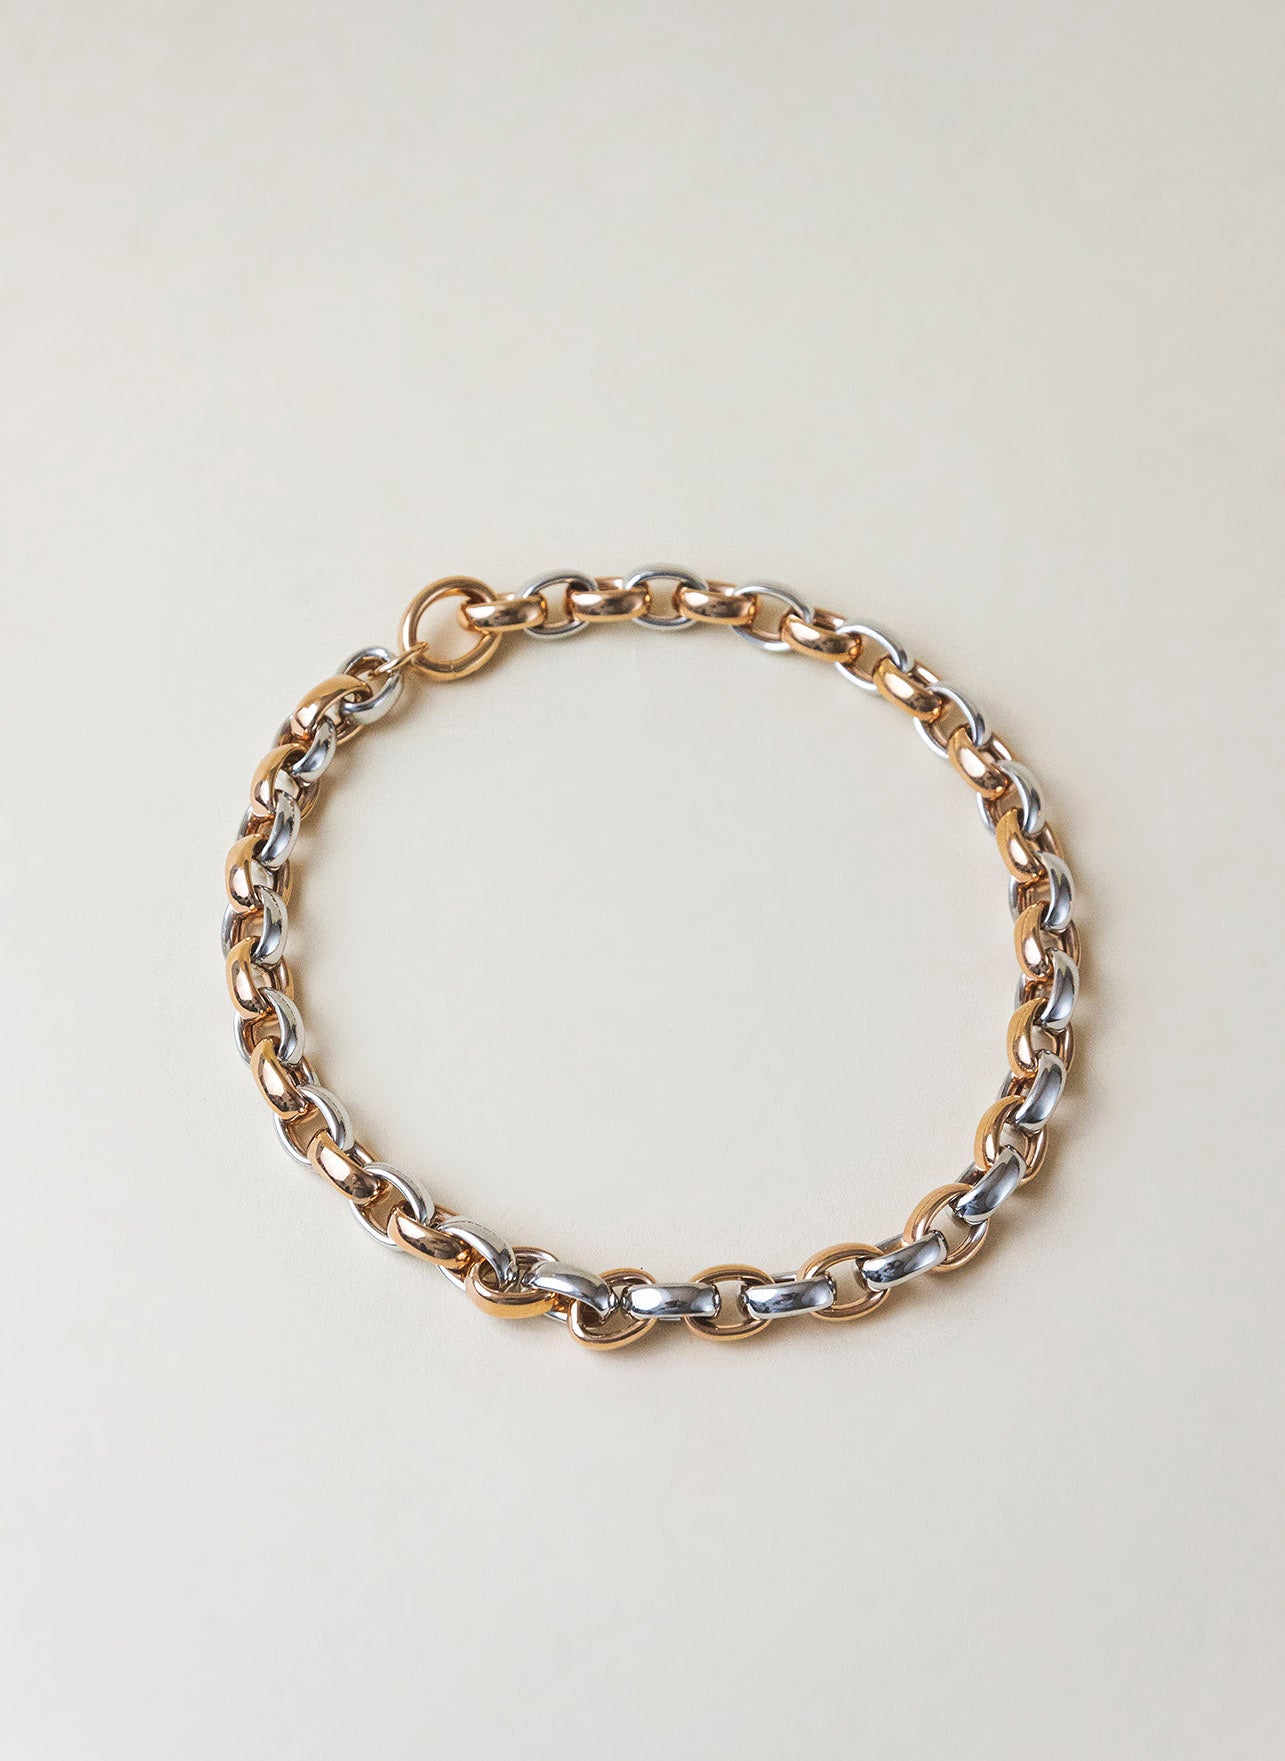 Silver Pesavento Chain in two tones